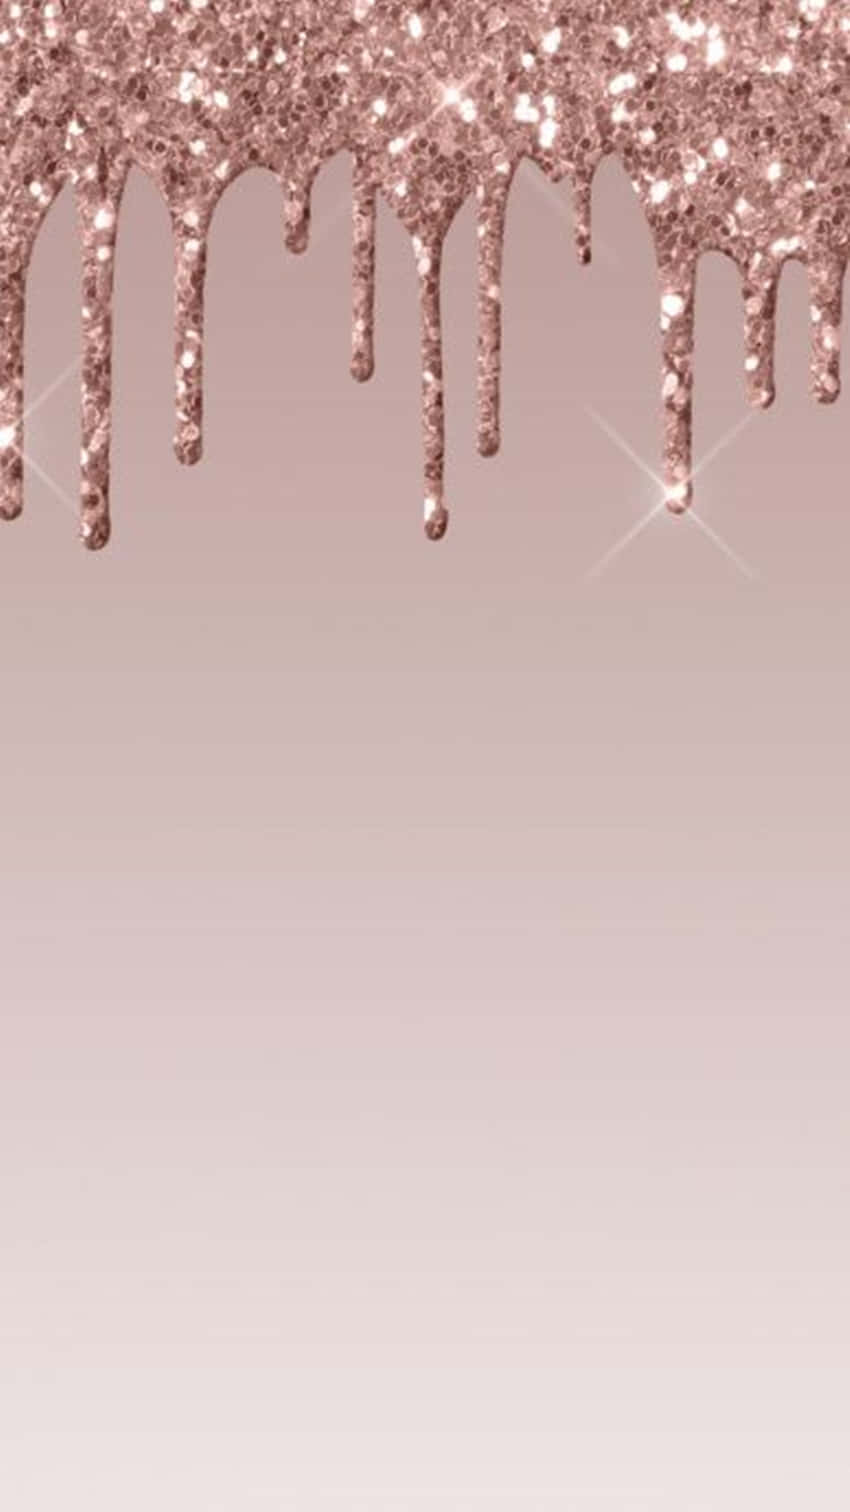 A Pink Glitter Background With Dripping Glitter Wallpaper